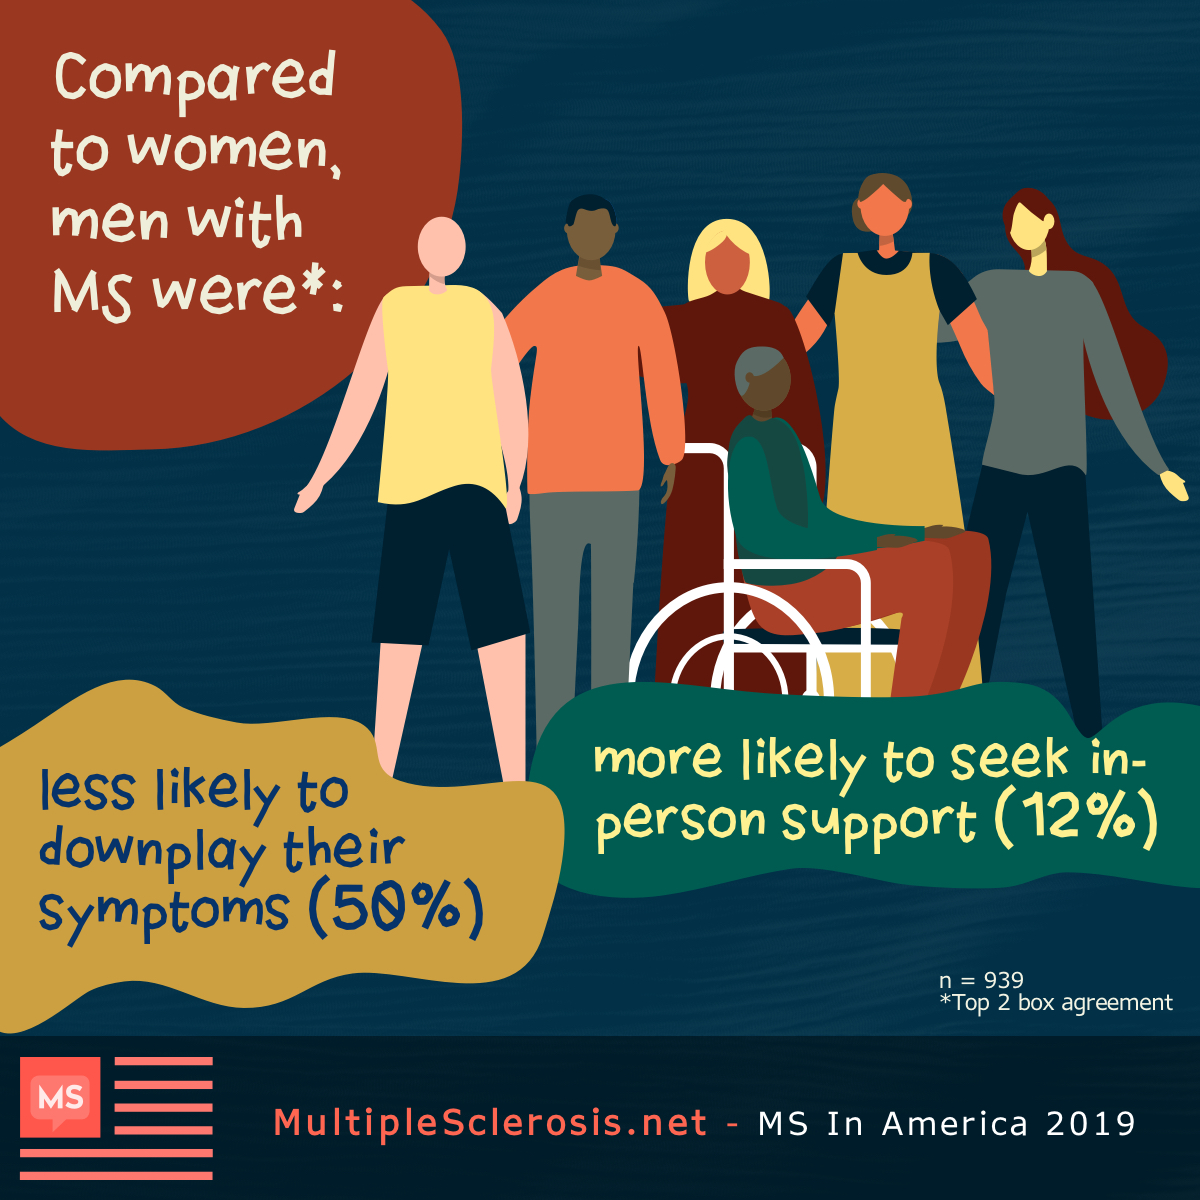 Men with MS were less likely to downplay their symptoms (50%) and more likely to seek in-person support (12%).